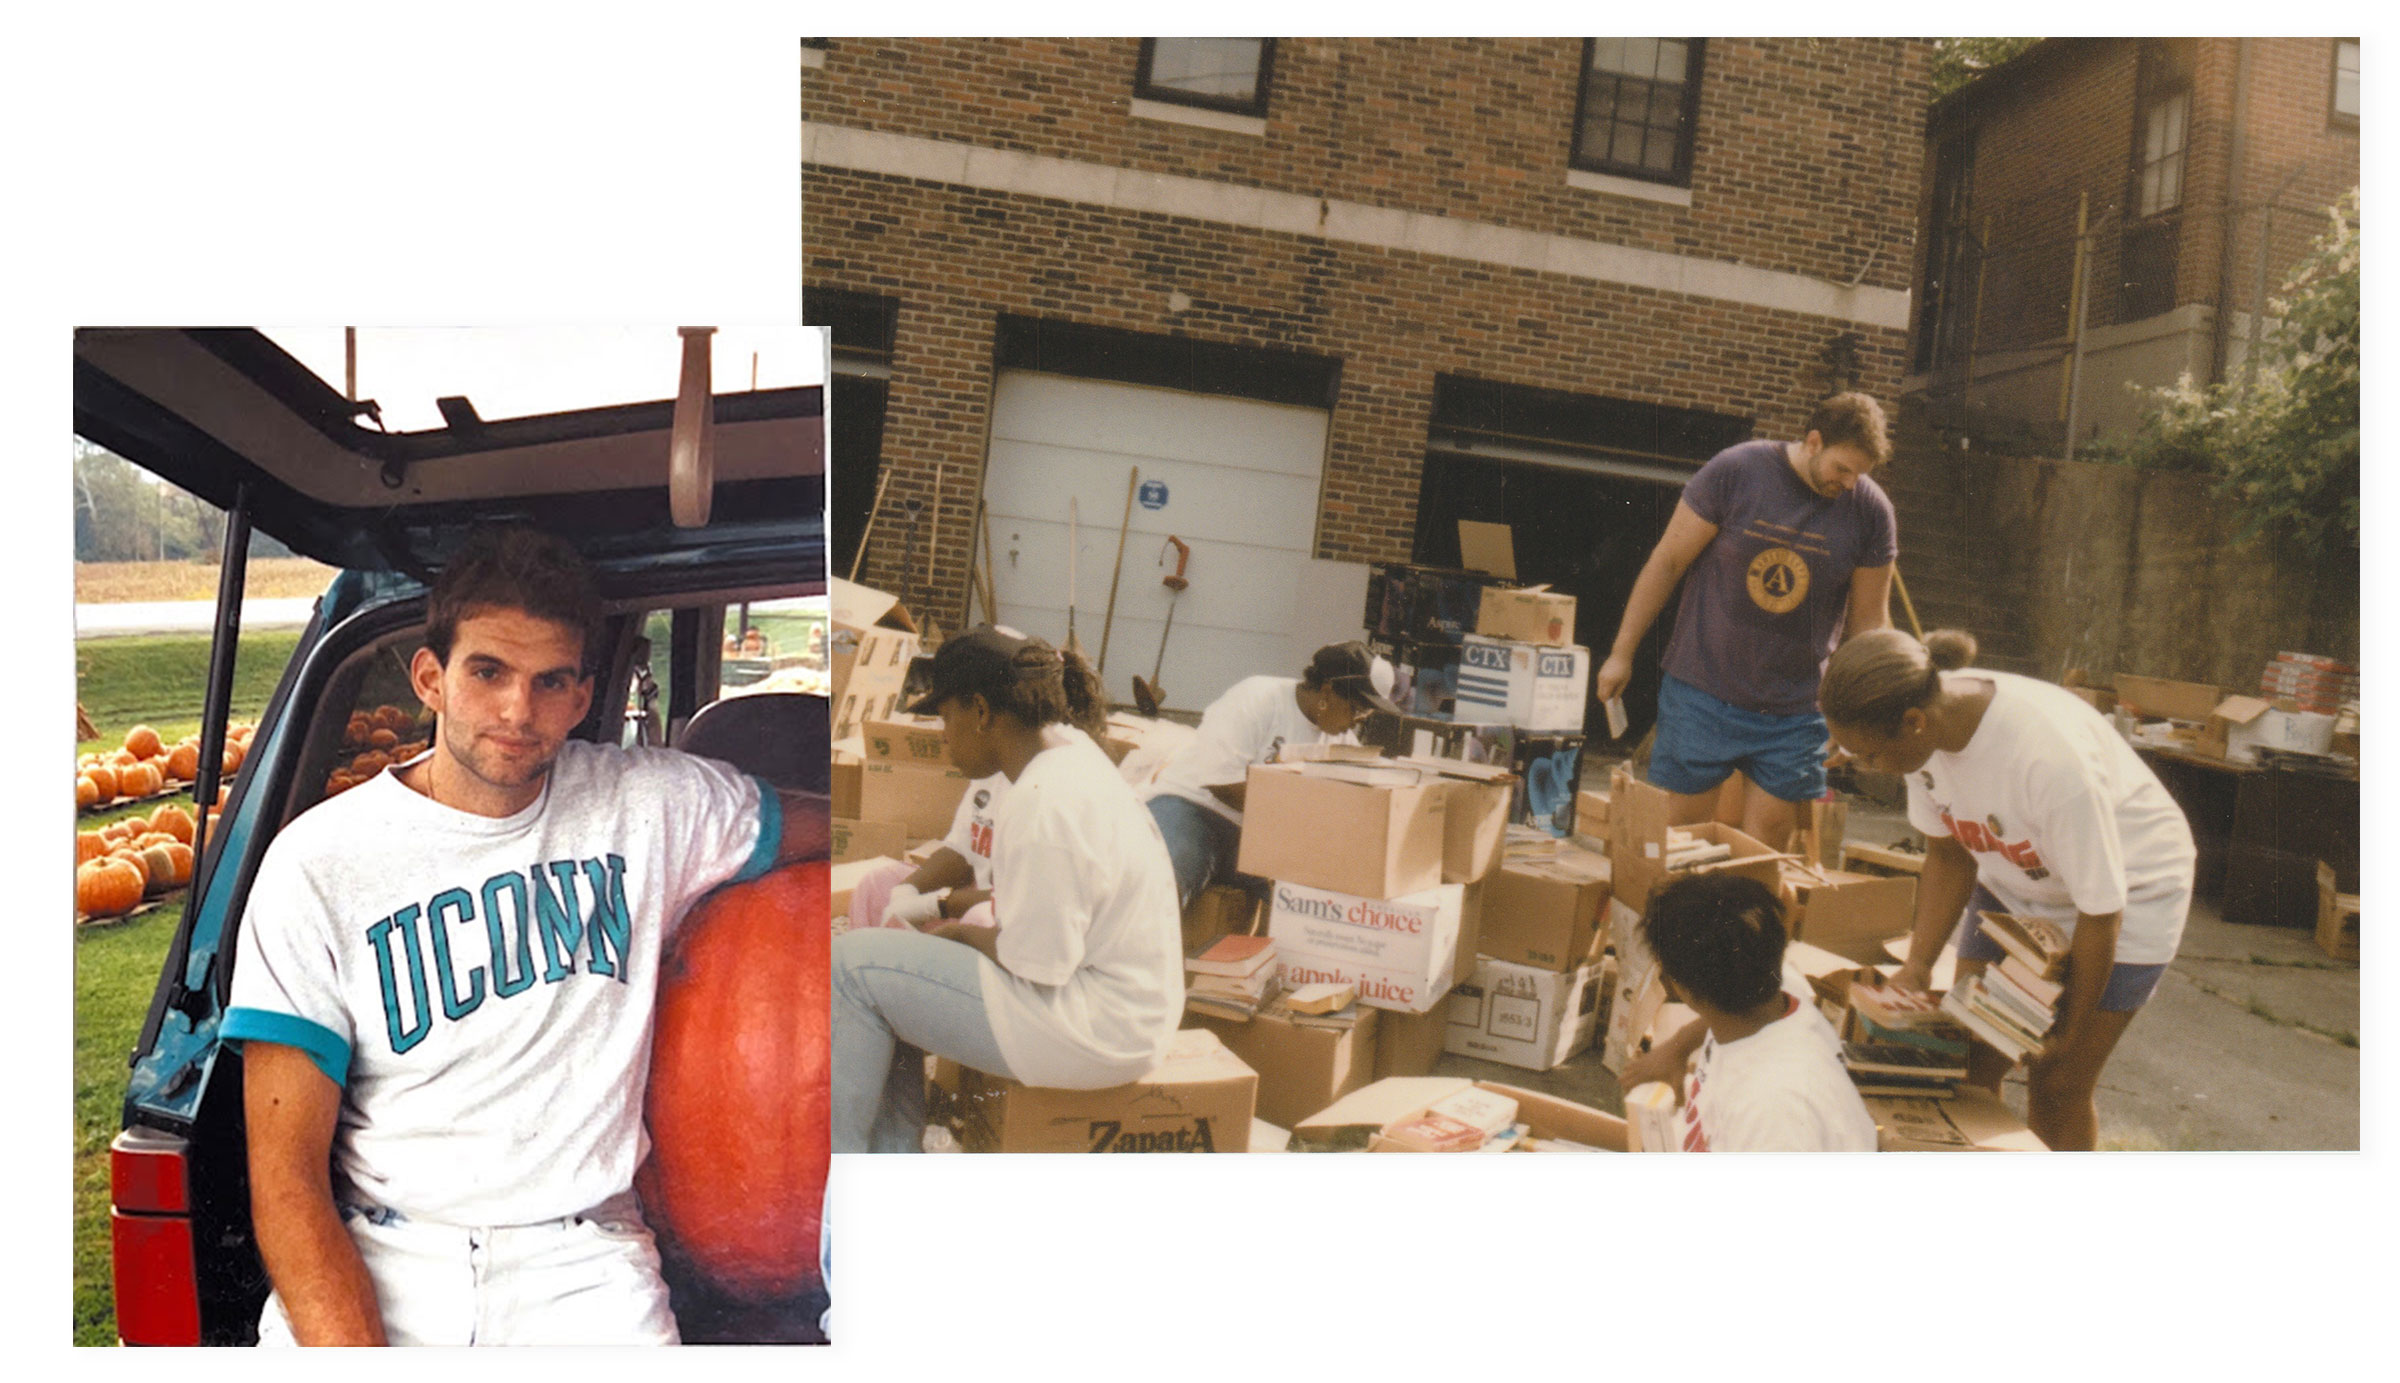 Older images showing John Fetterman when he was younger, one shows him young in a UCONN t-shirt in the back of a car with pumpkins in the other he is in a t shirt and shorts in the 1990's packing boxes with people